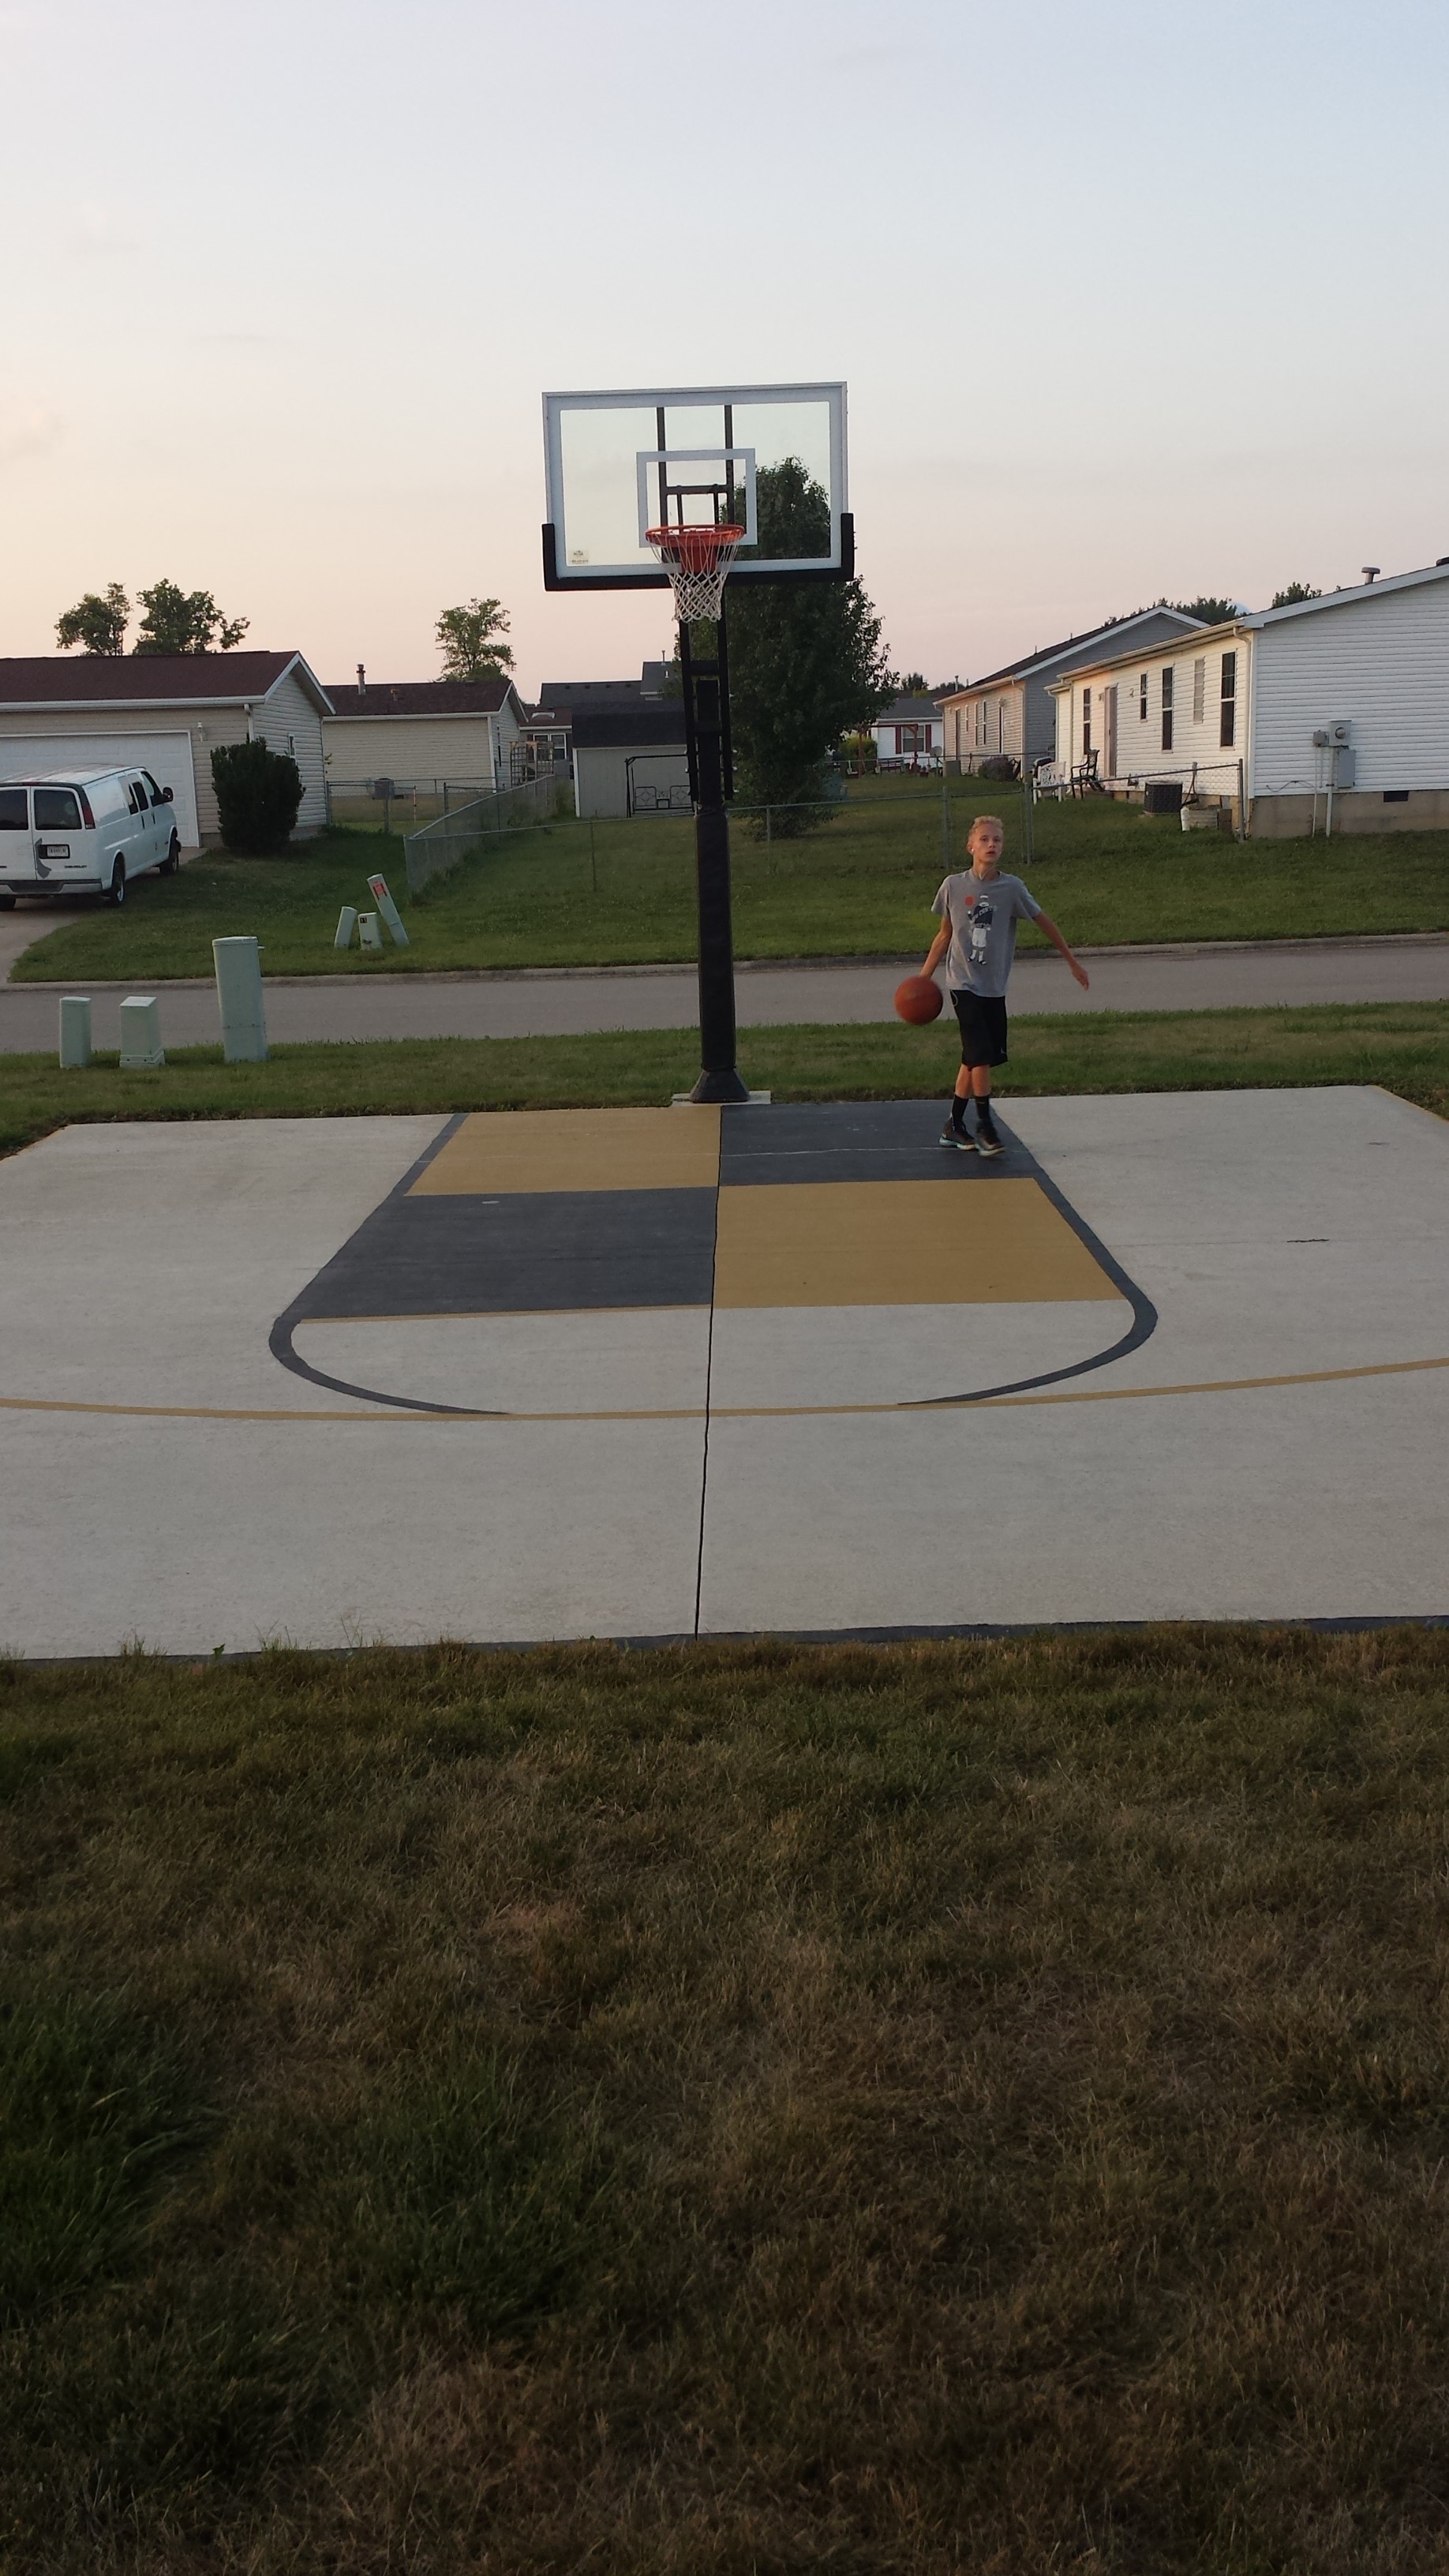 Players dribbles inside the the key. The Pro Dunk Gold basketball hoop sits center.